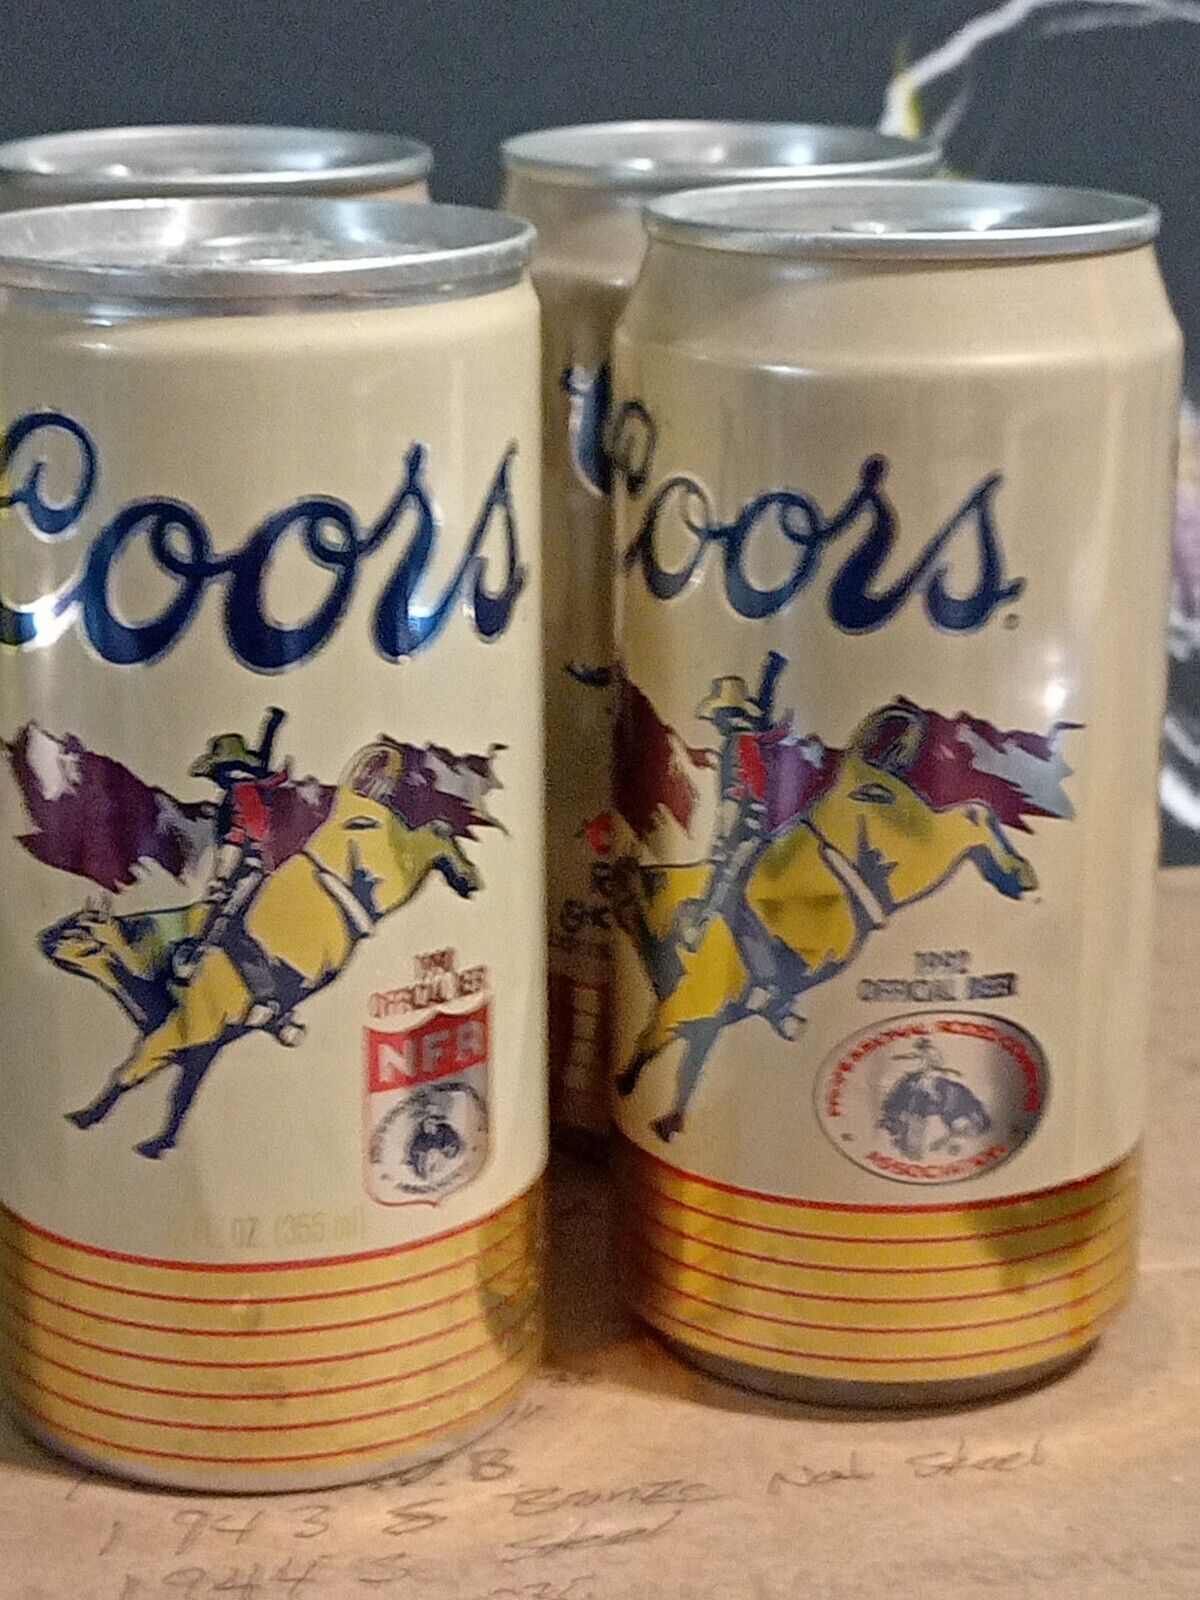 1992 COORS  RODEO SHOWDOWN BEER CANS Empty COWBOY BULL RIDE COLORADO